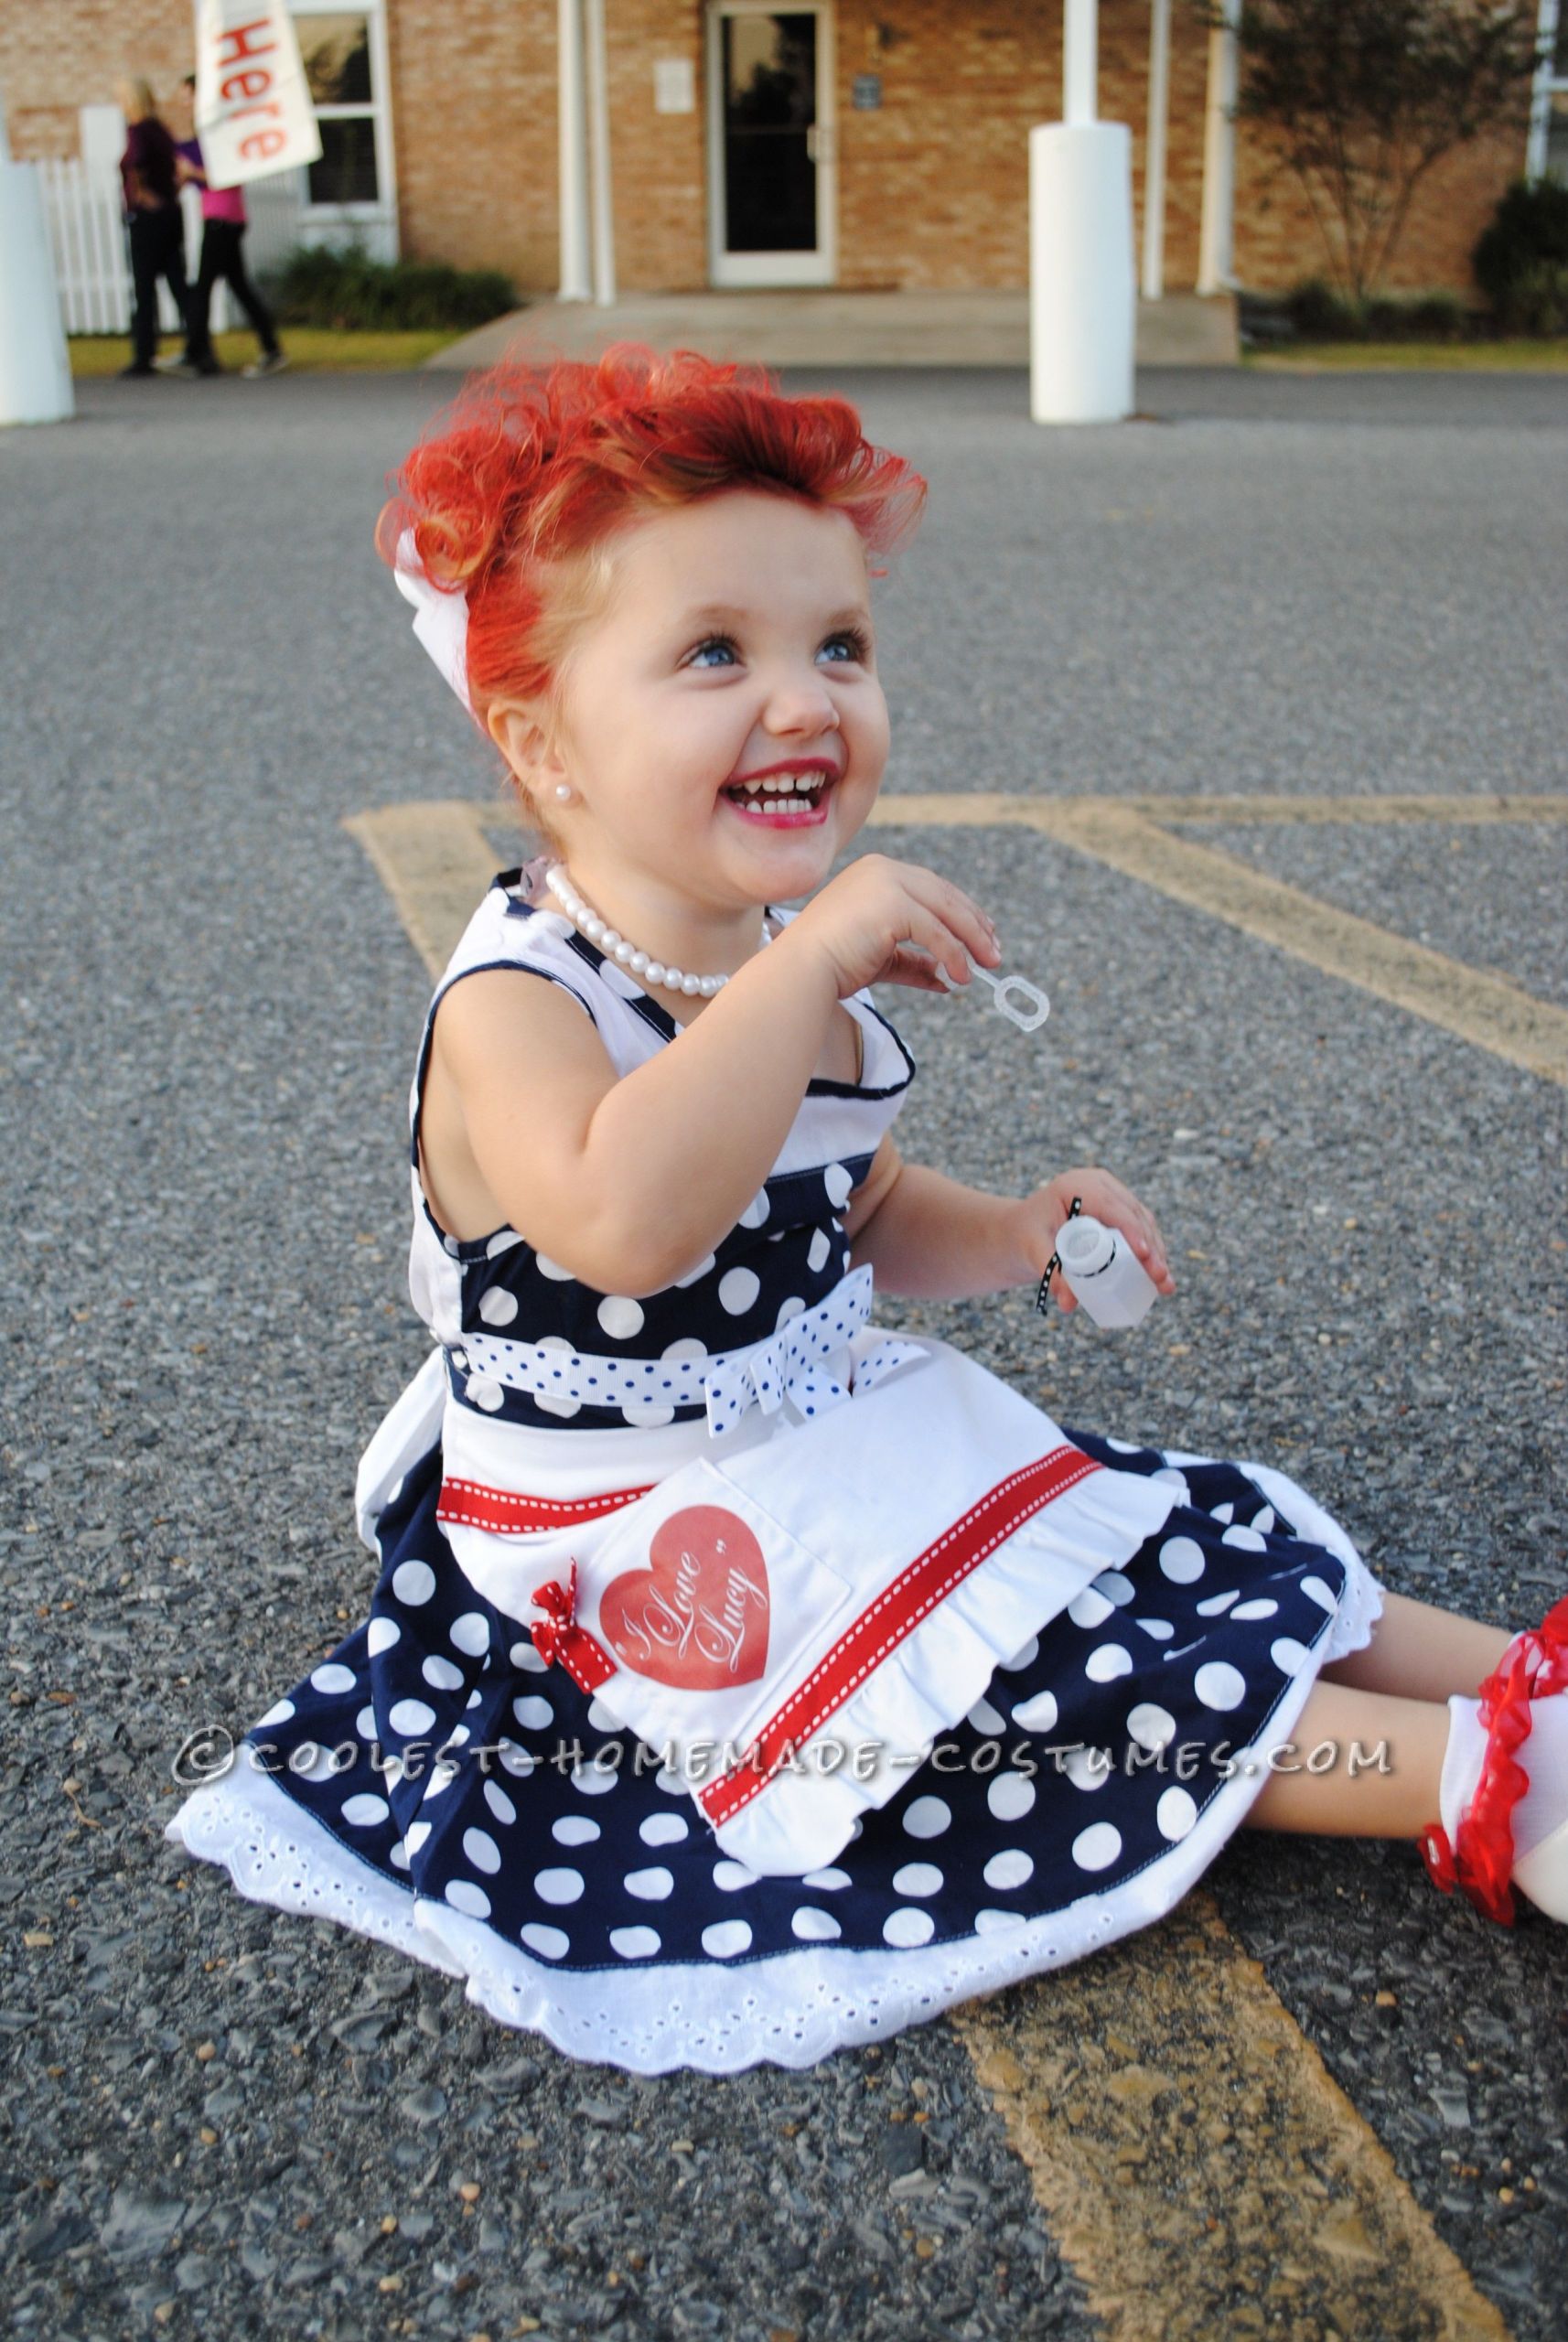 DIY Baby Girl Costume
 Adorable “I Love Lucy” Homemade Costume for a Toddler